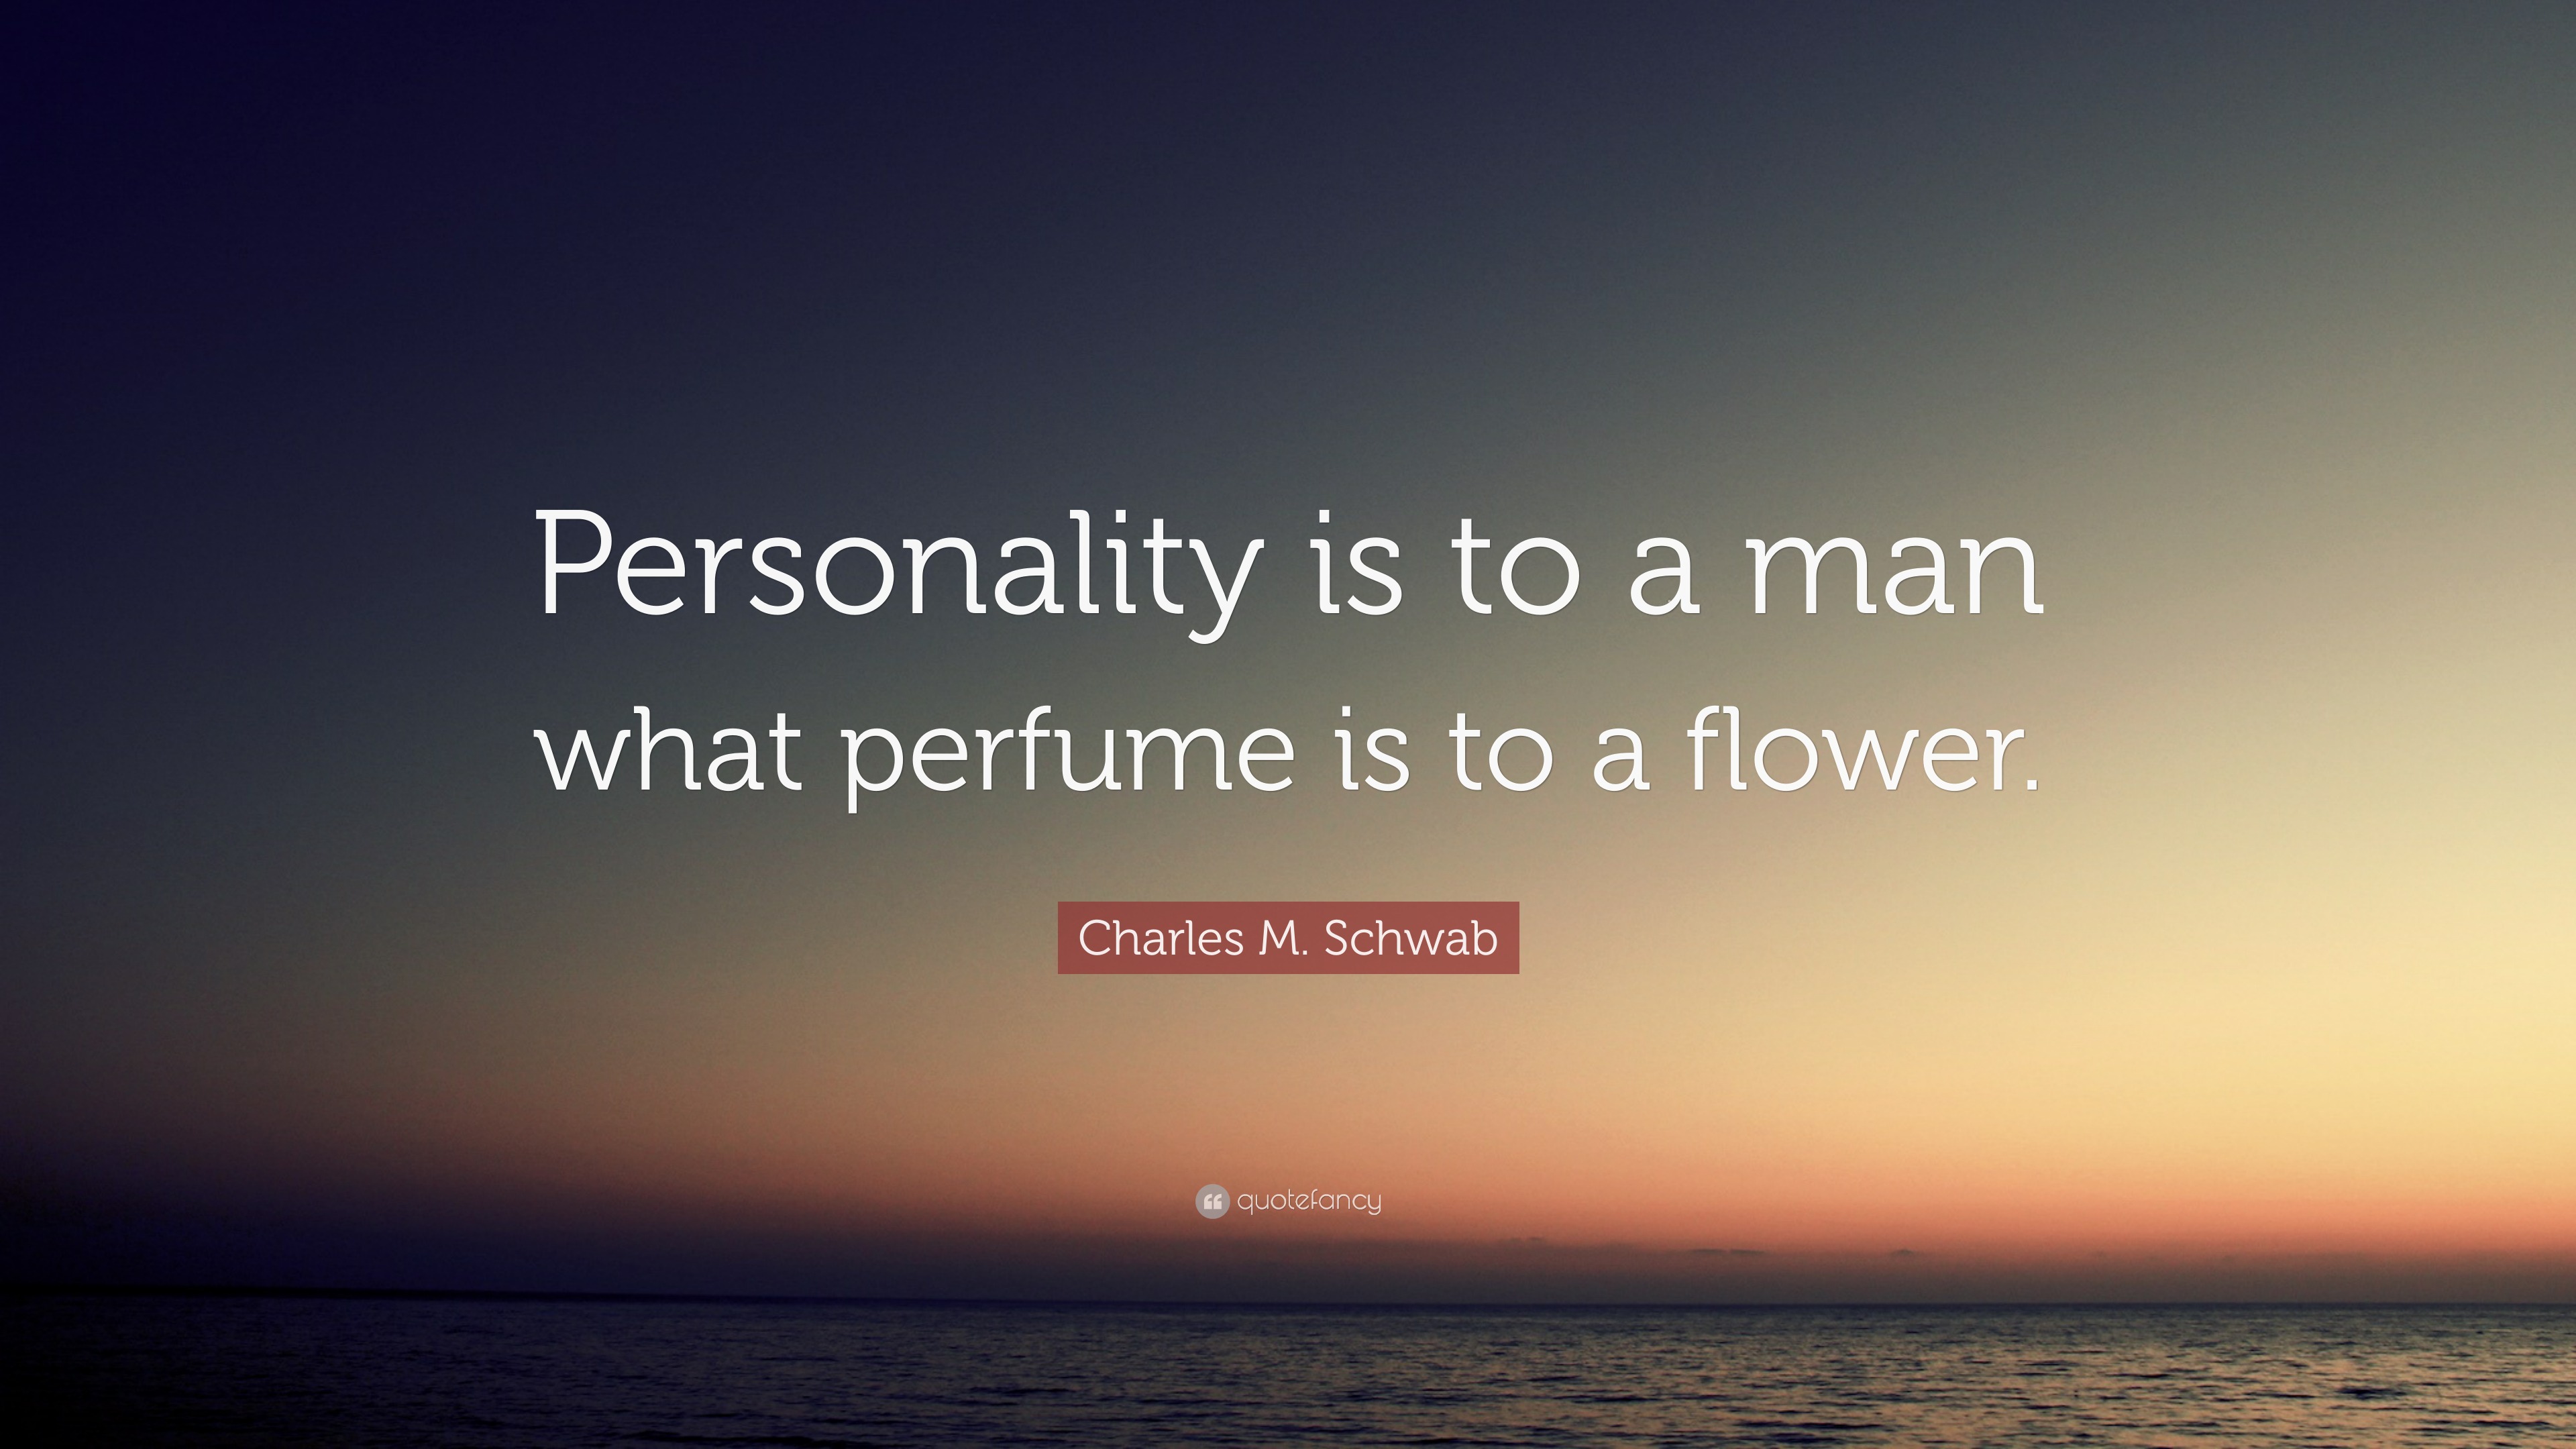 Charles M. Schwab Quote: “Personality is to a man what ...